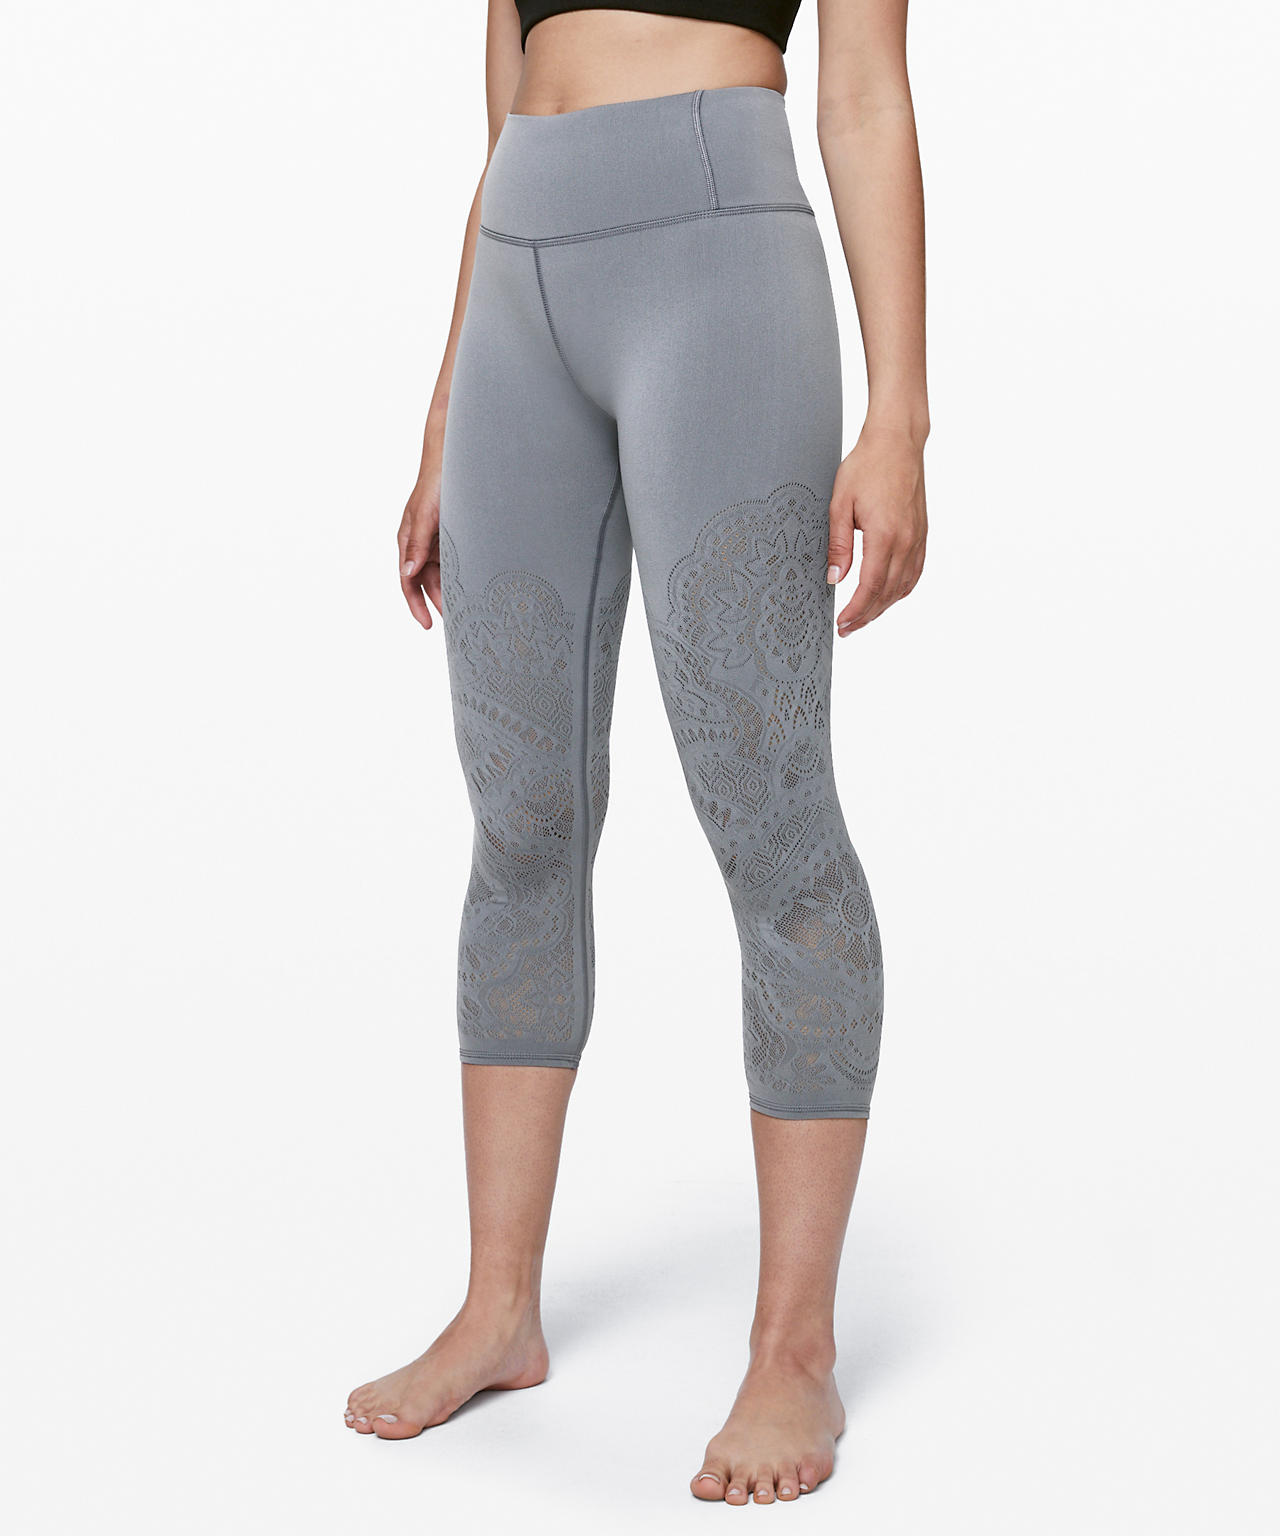 lululemon reveal tight review